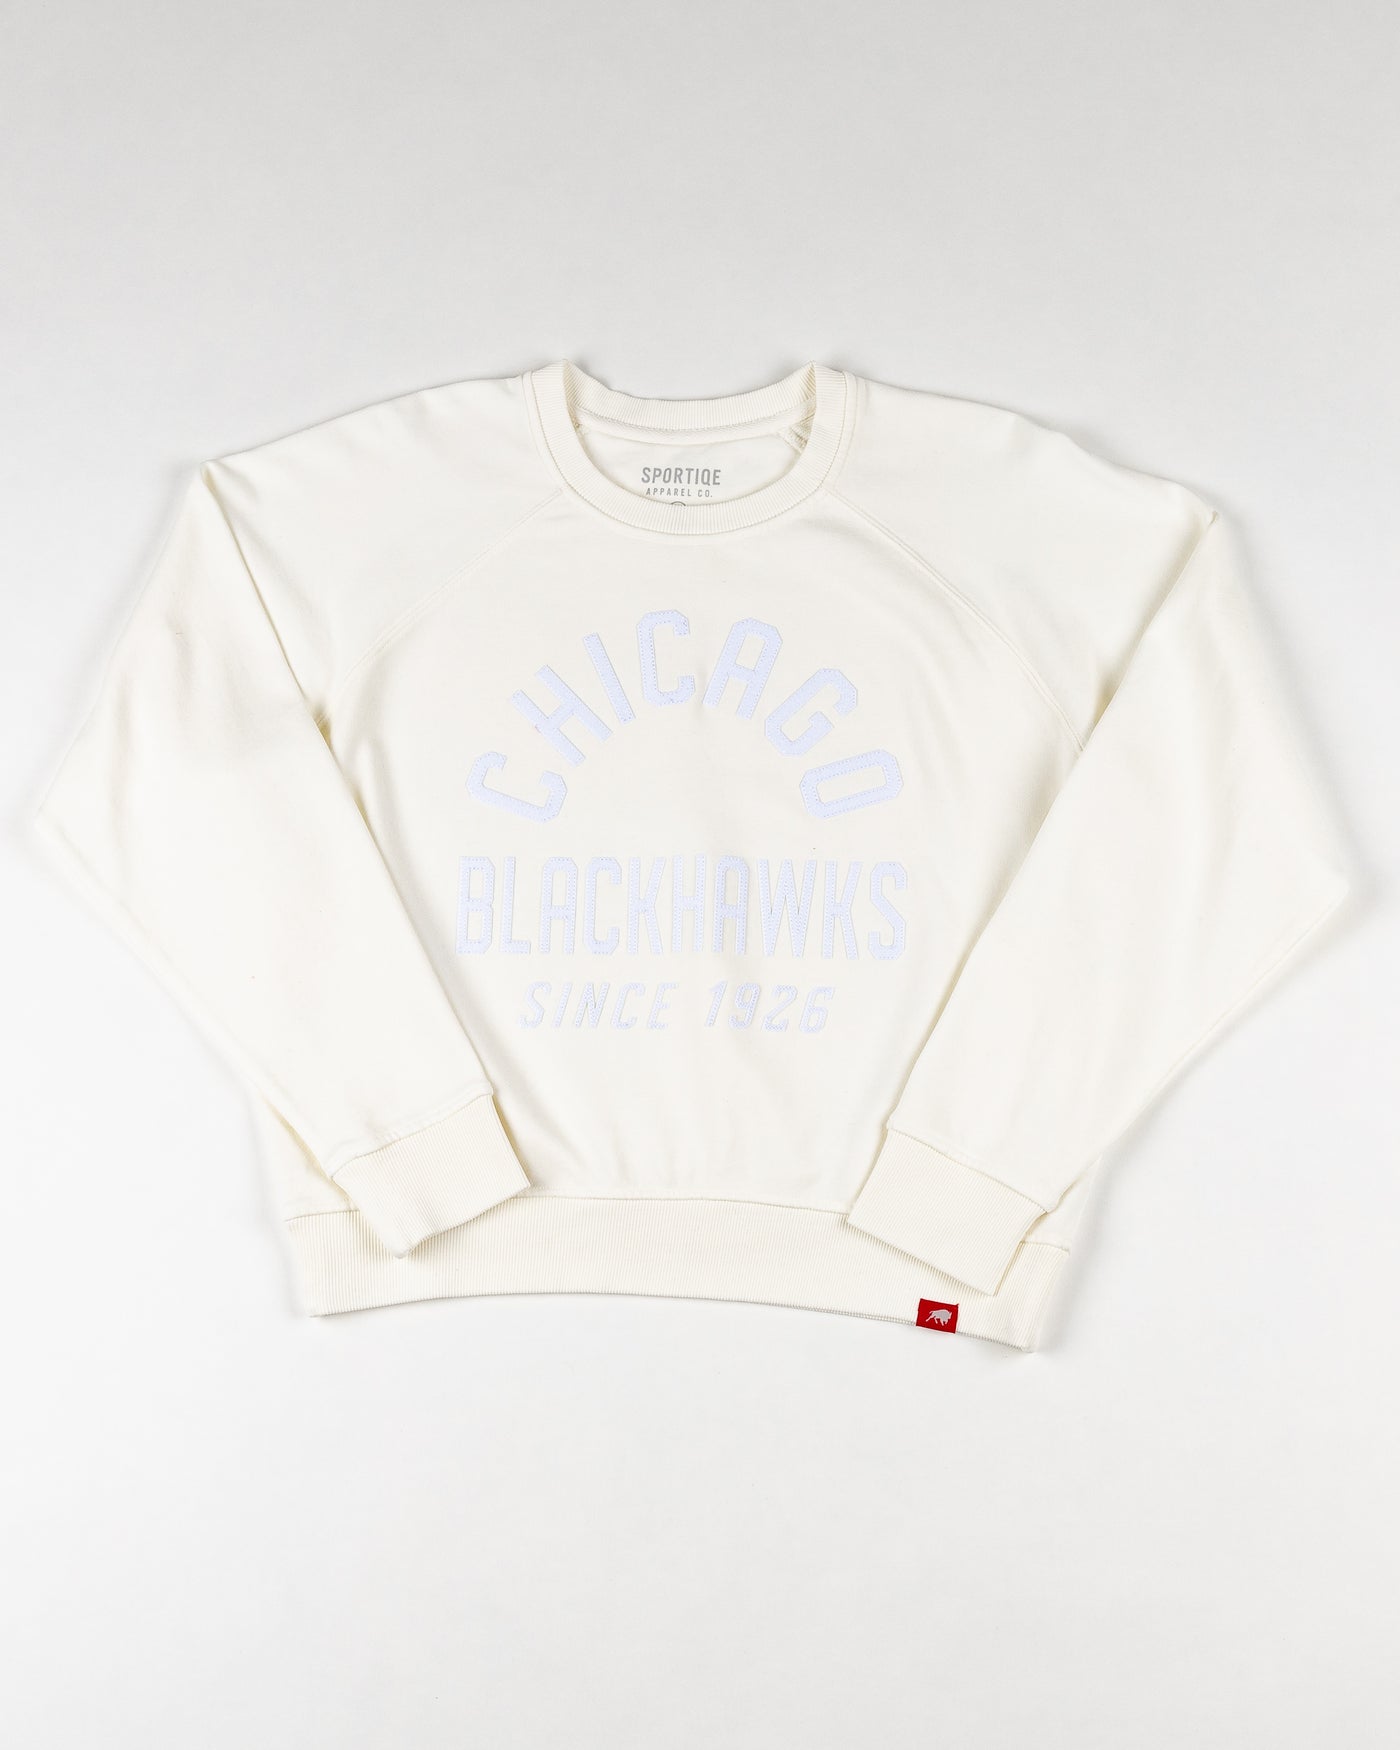 white Sportiqe ladies crewneck with tonal Chicago Blackhawks wordmark graphic embroidered across front - front lay flat